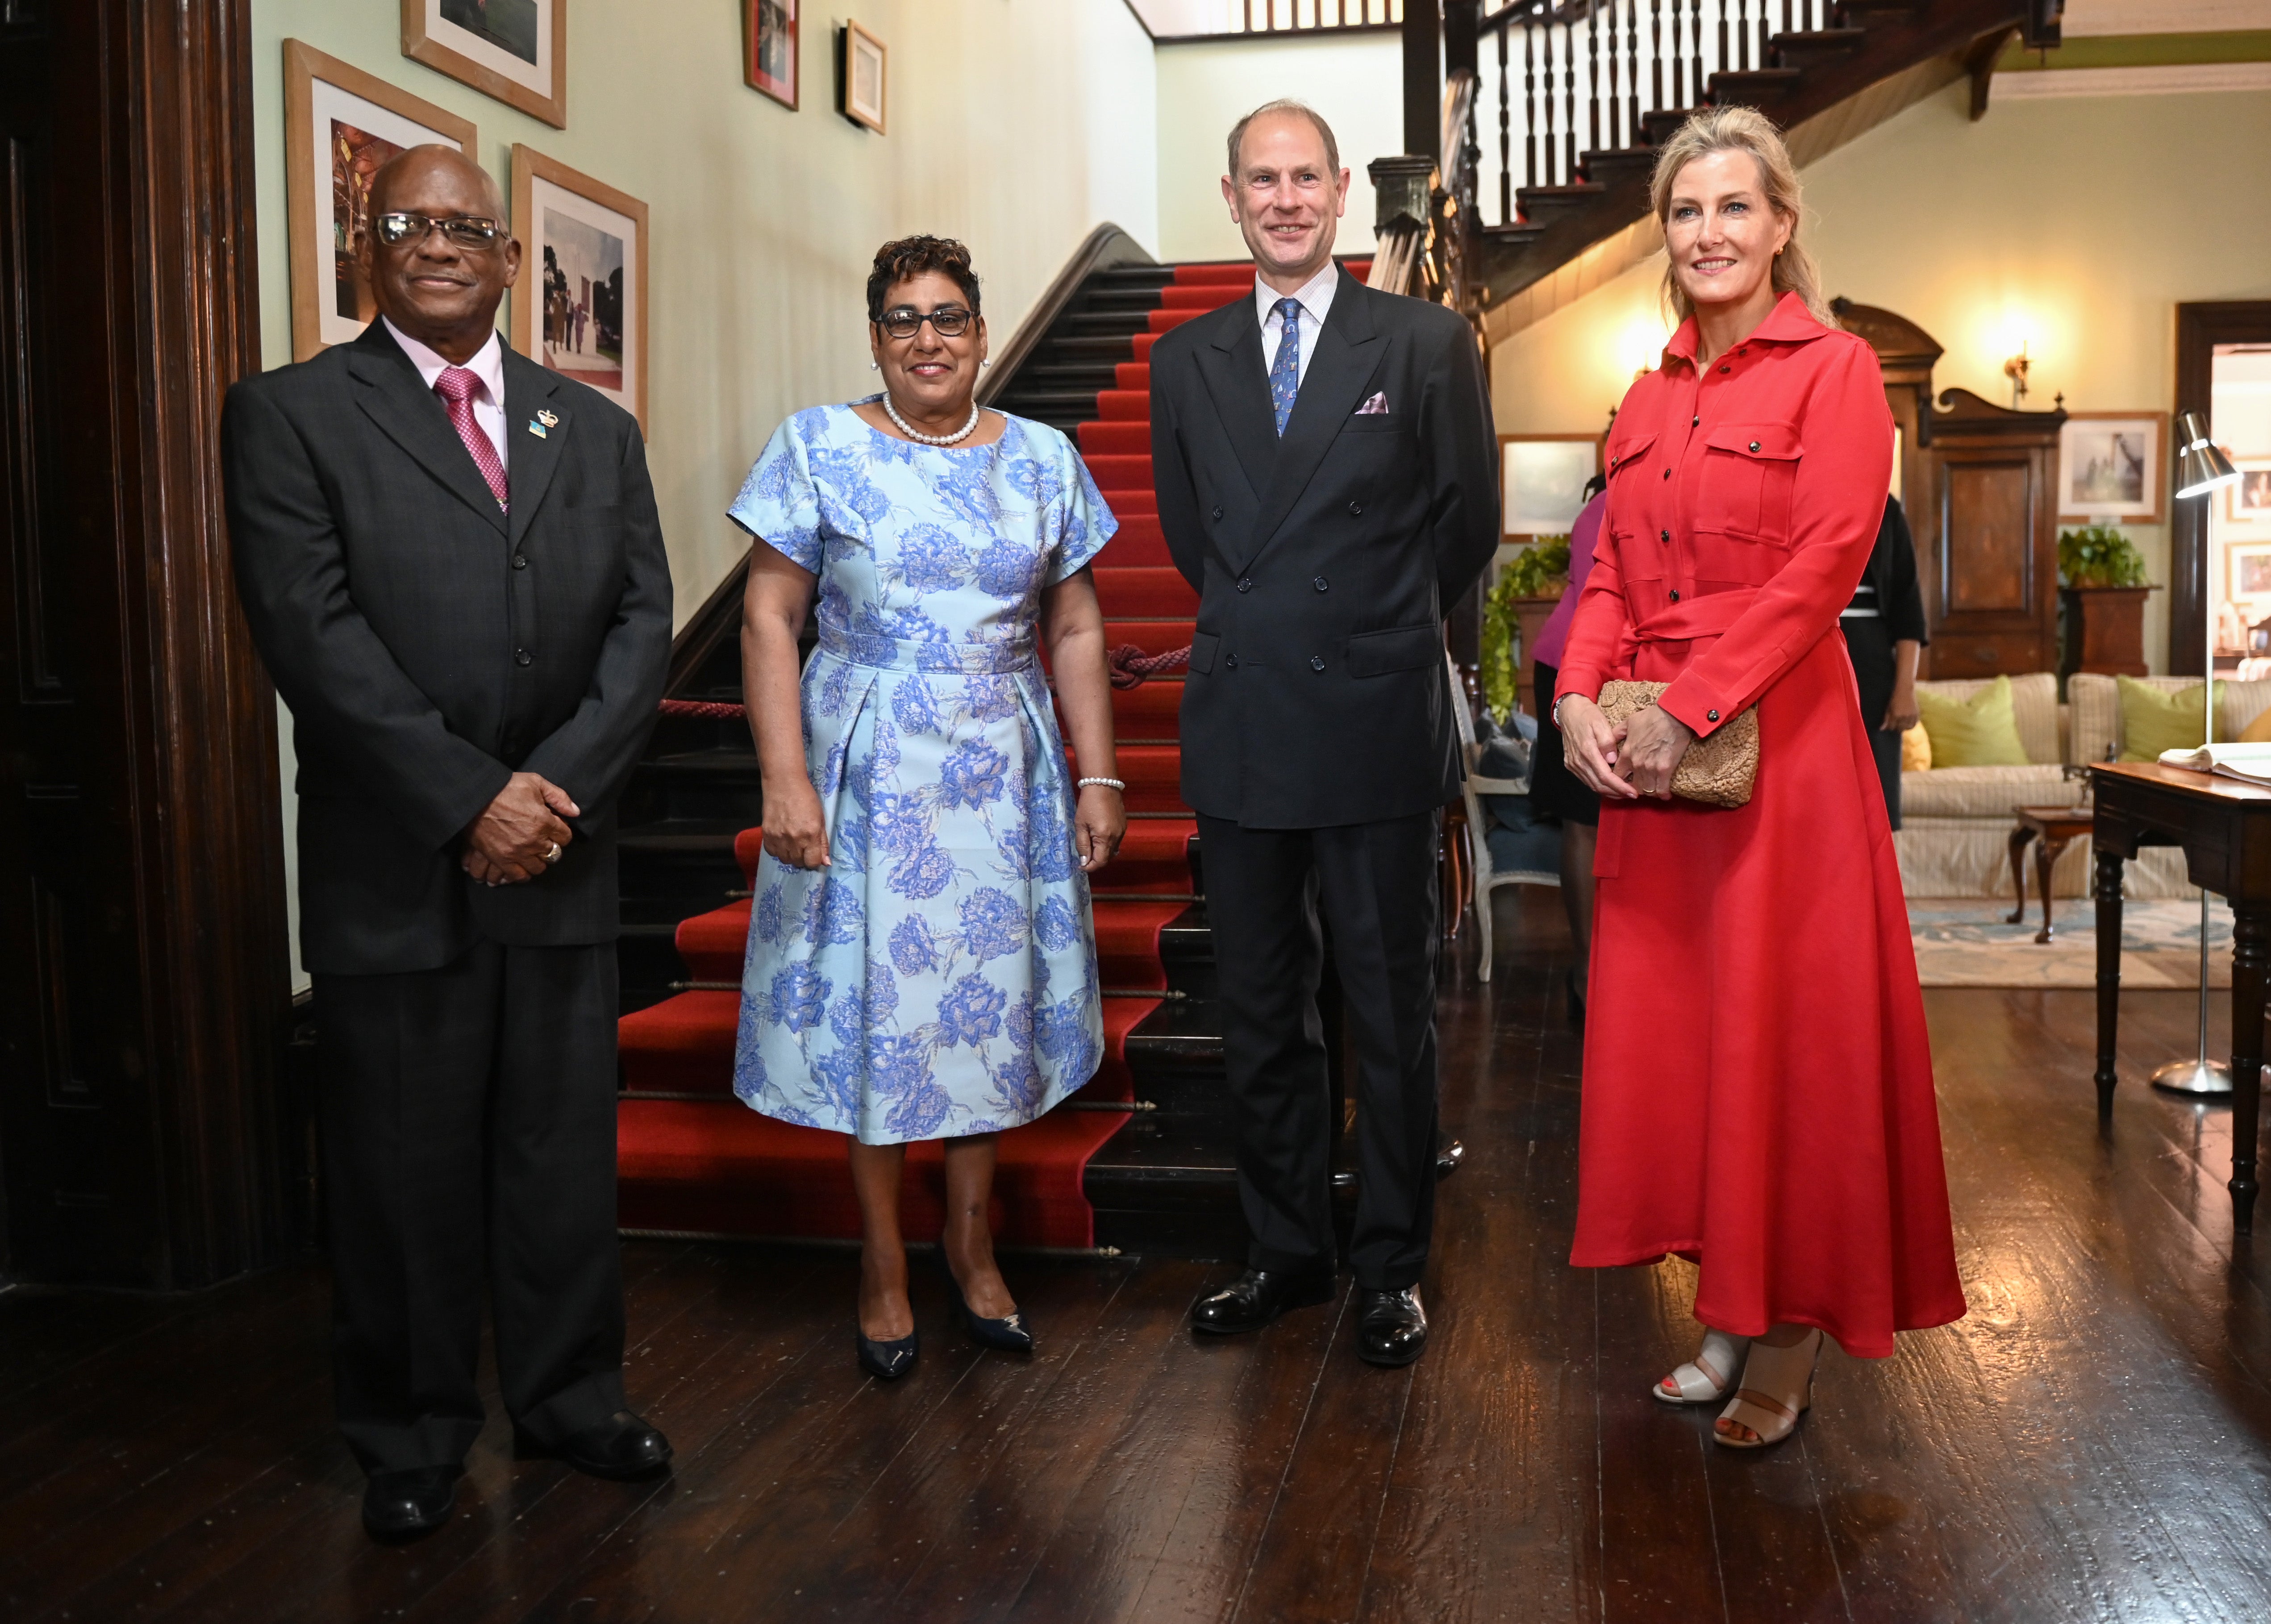 Edward and Sophie with Cyril Errol Melchiades Charles, acting governor general of Saint Lucia and his wife Anysia Charles in Castries